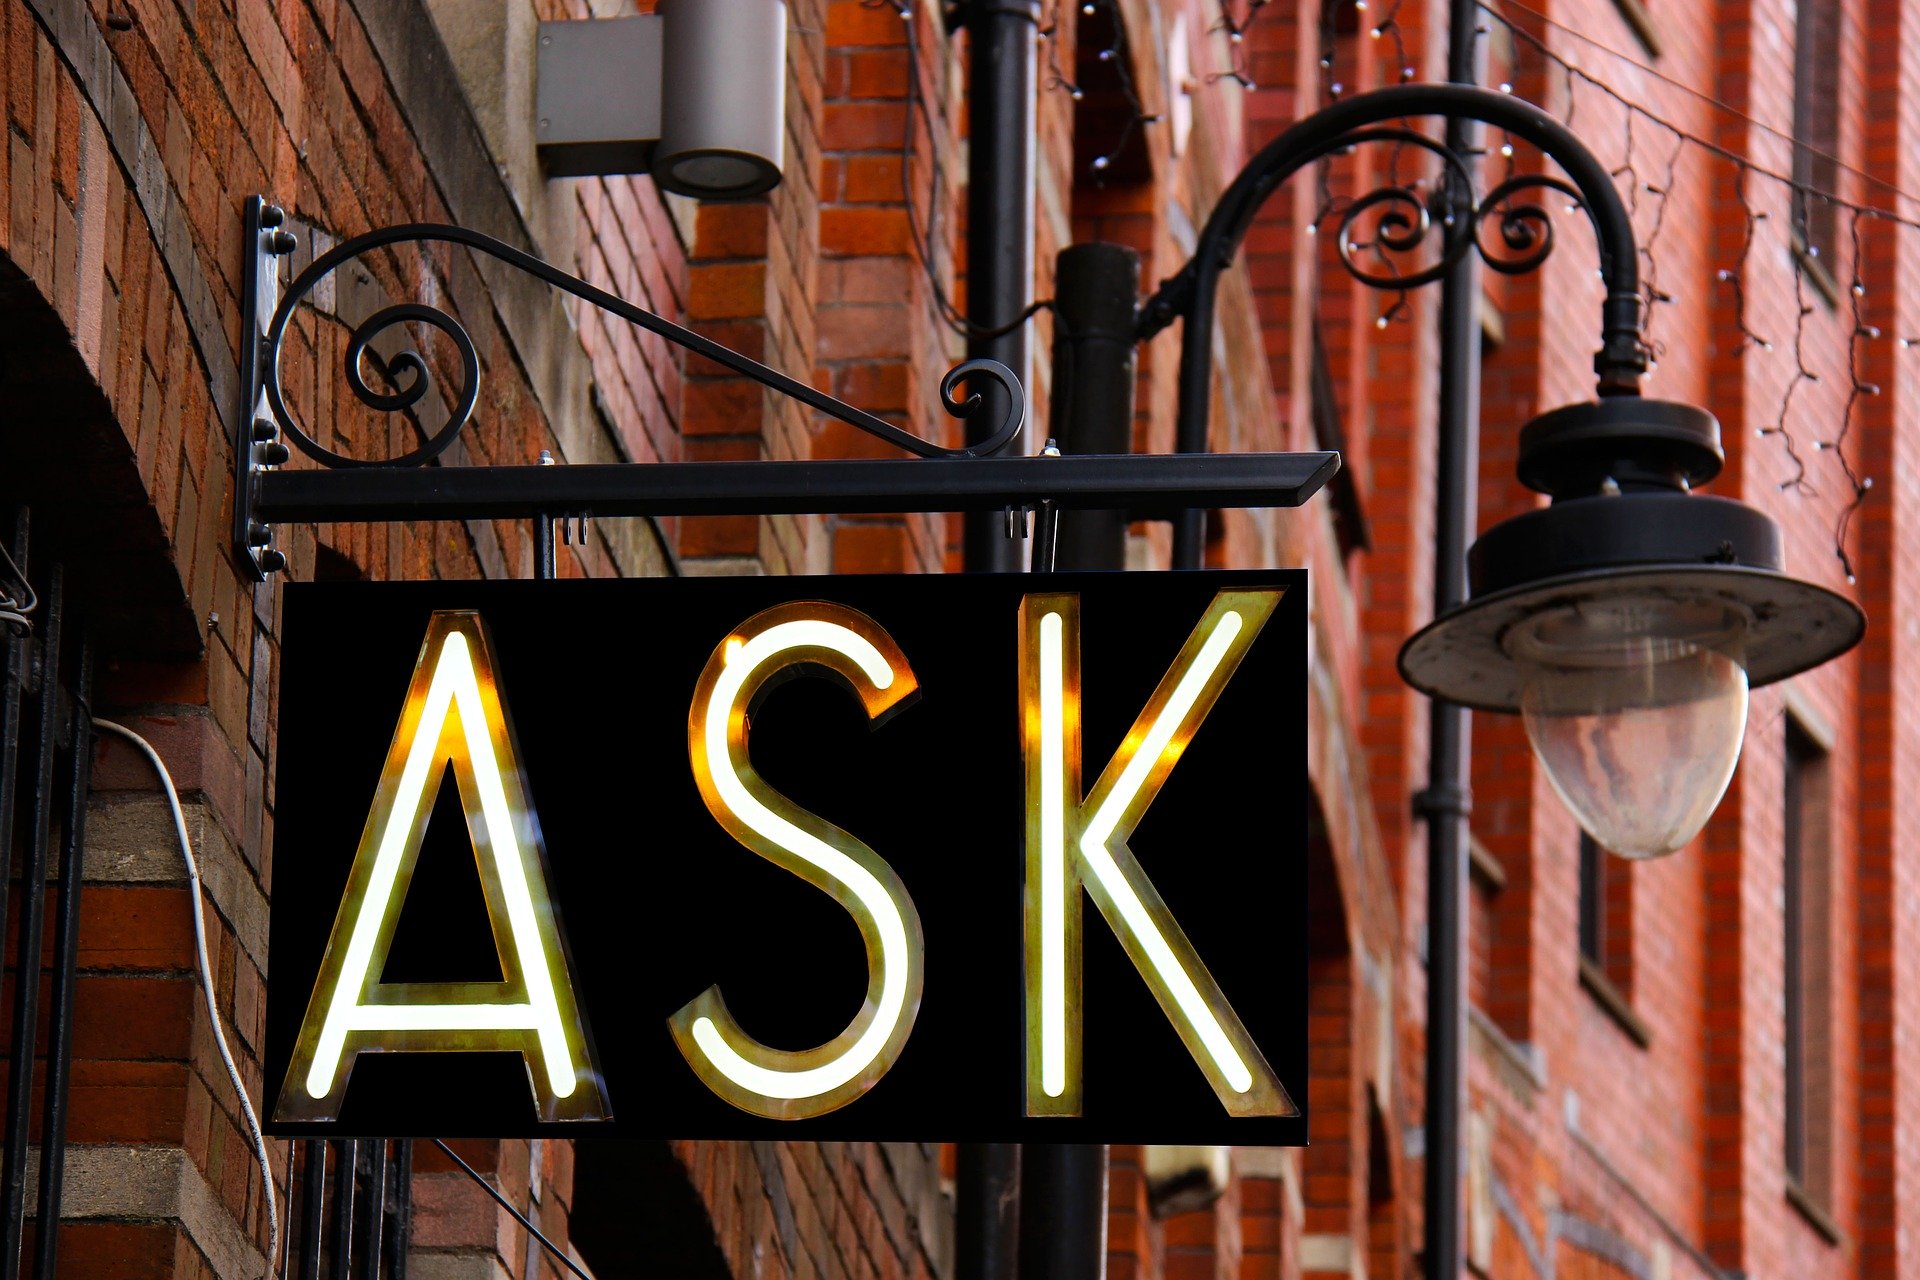 Ask signage